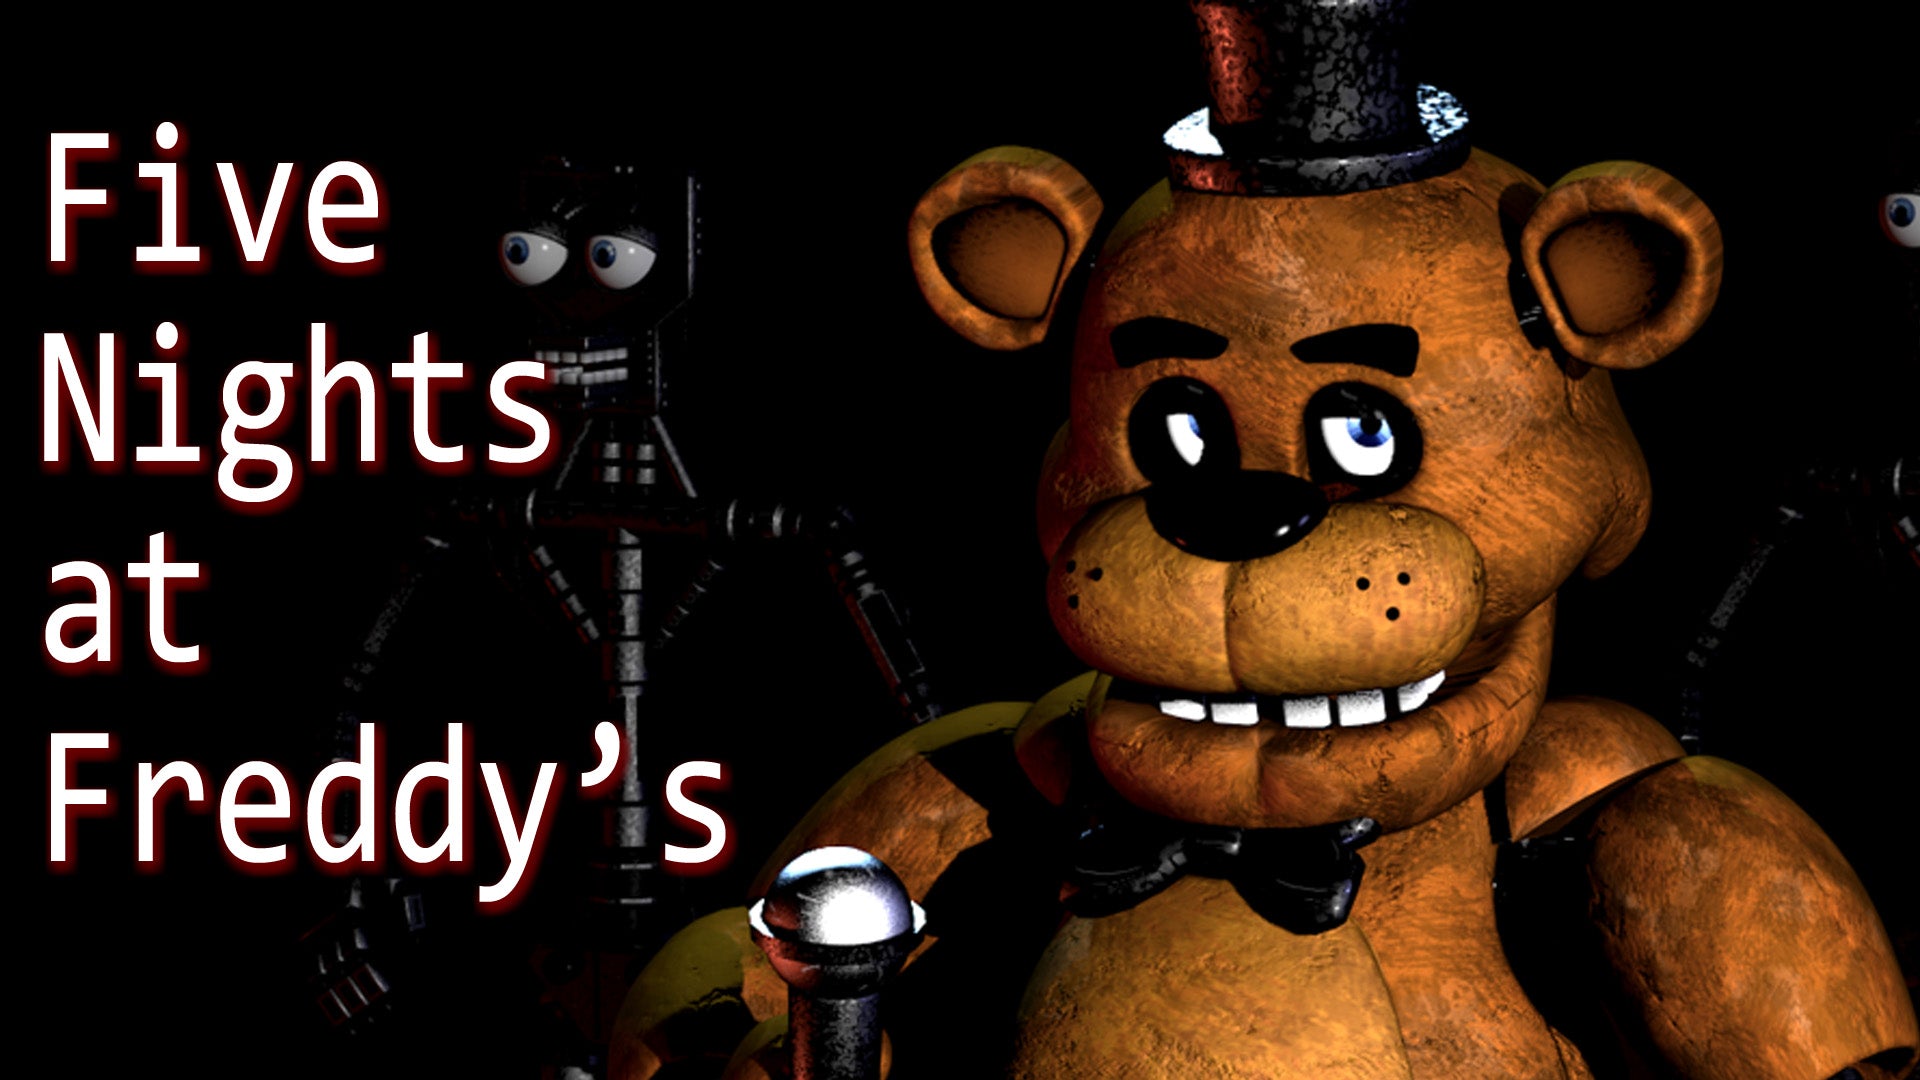 5 Secrets You Might Not Have Known About the Five Nights at Freddy's Universe